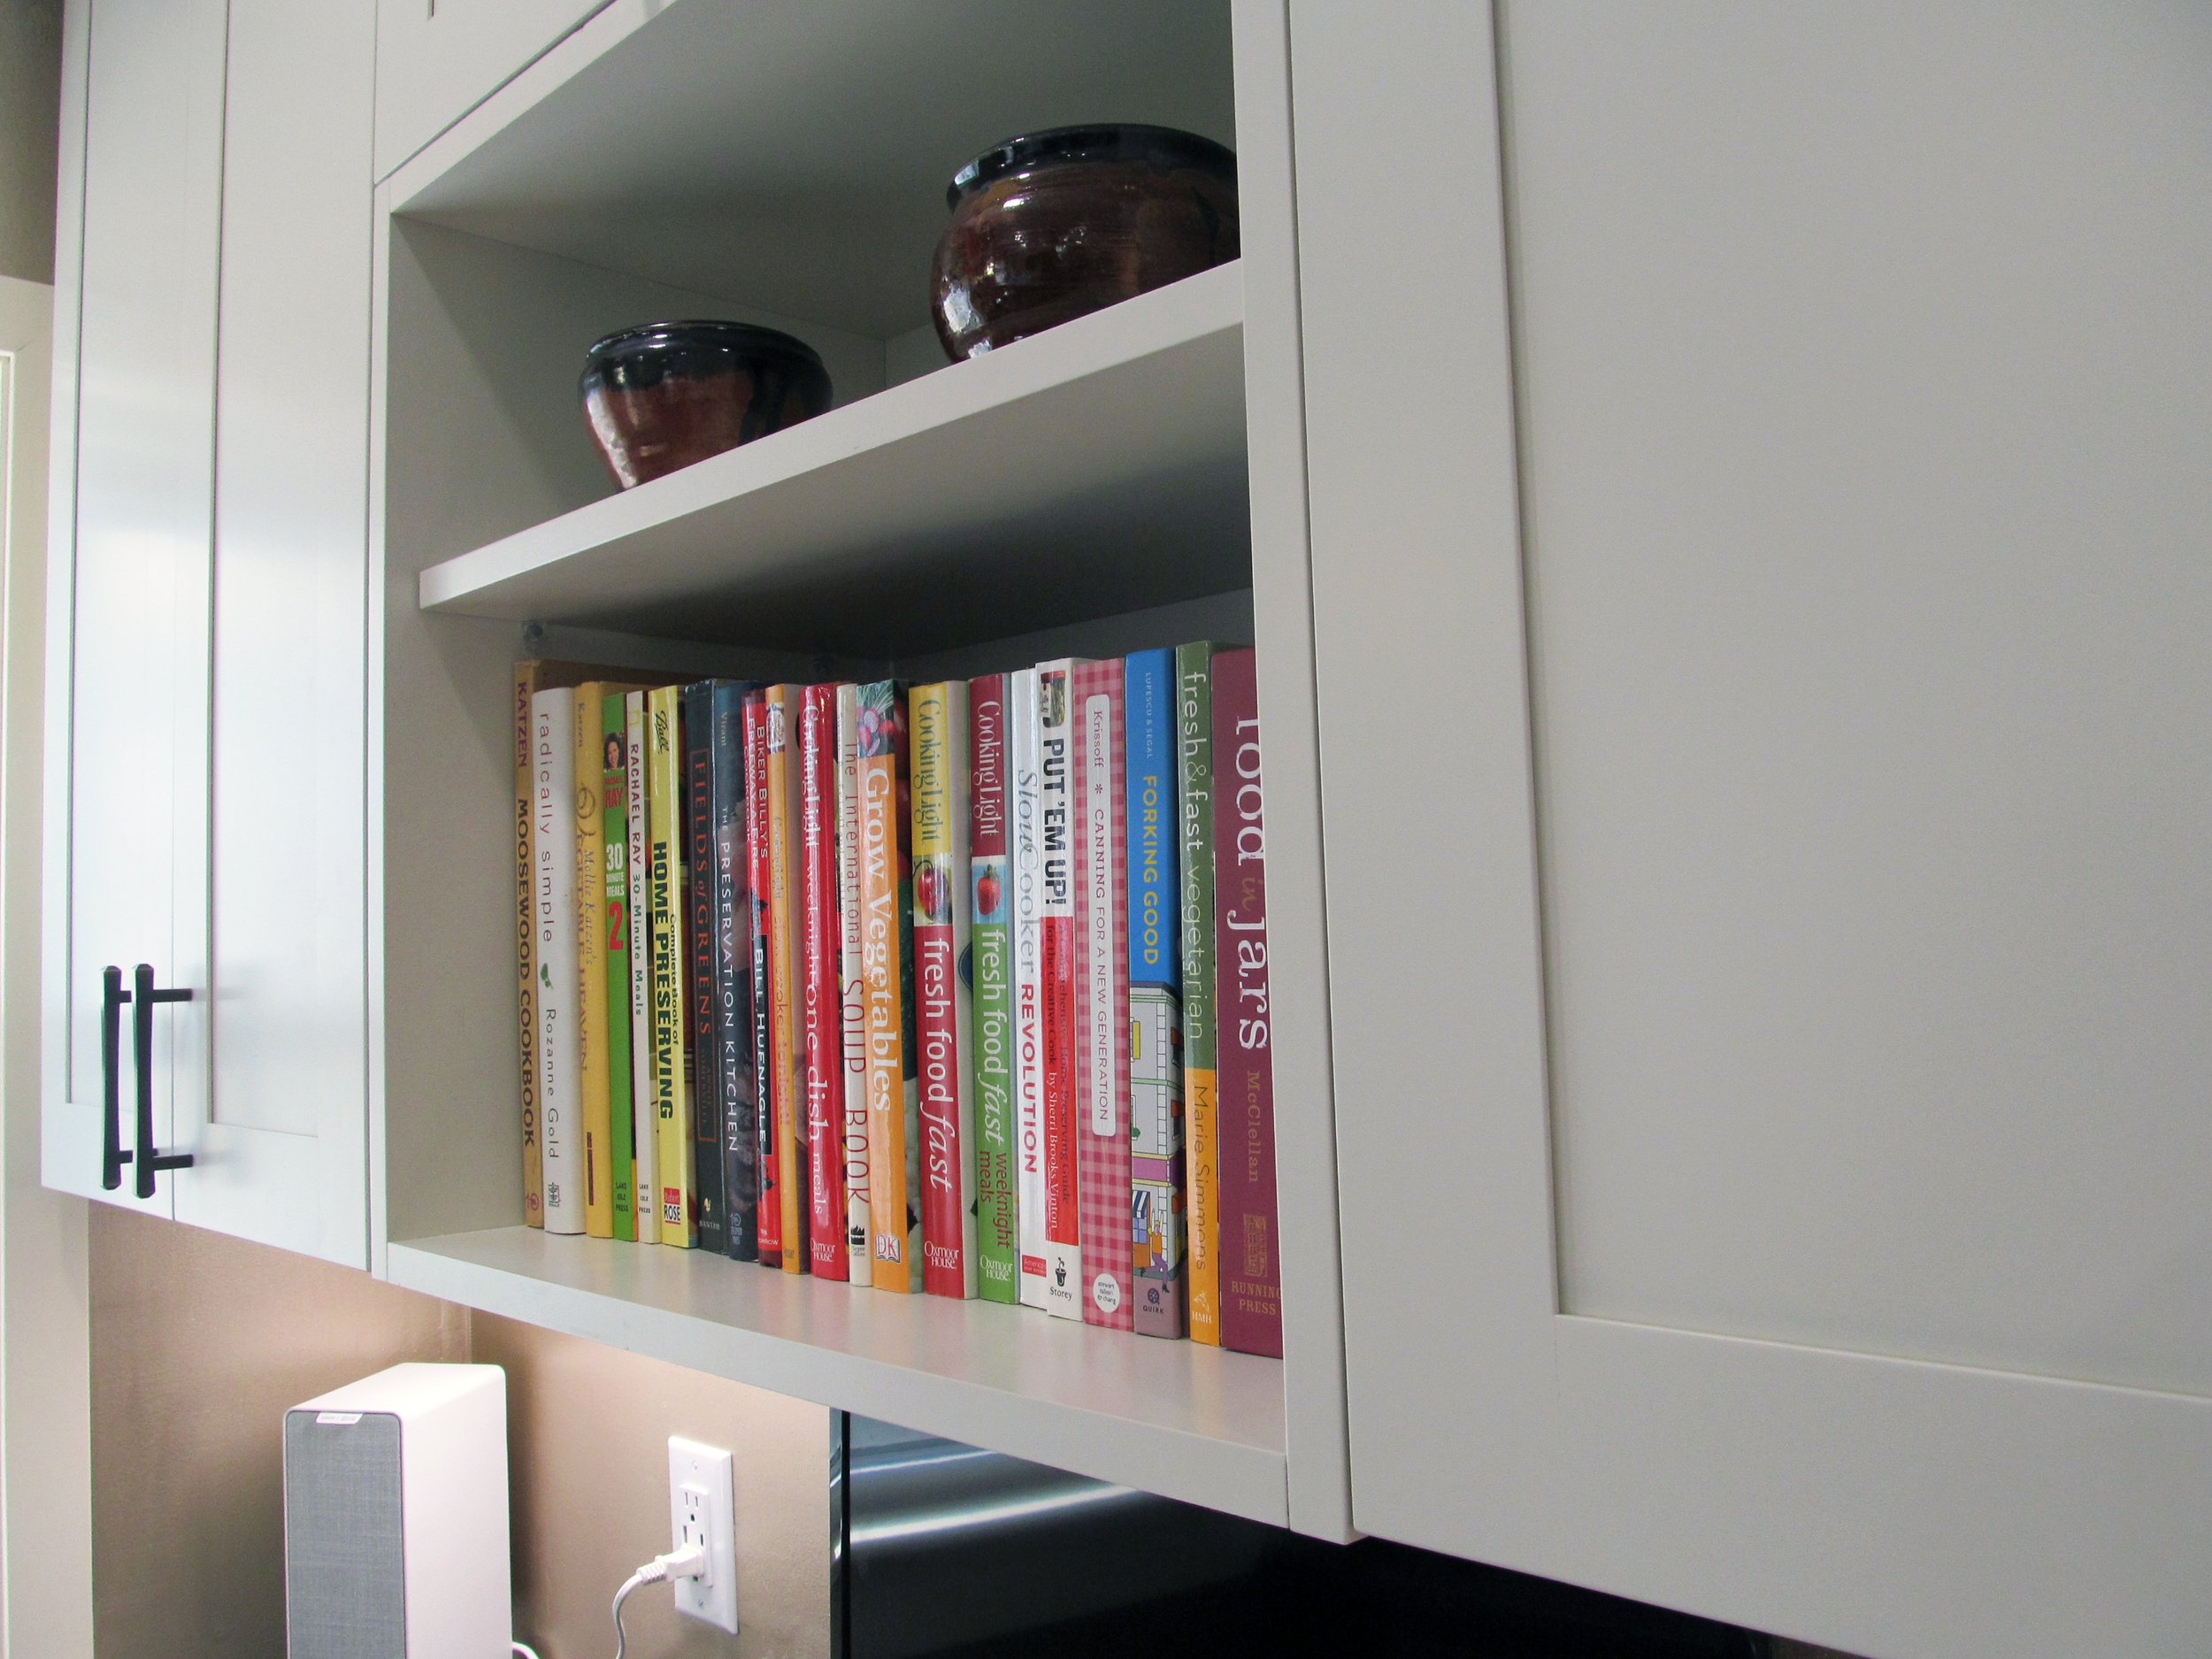 The depth of this open cabinet was increased to align with the doors of adjacent cabinets